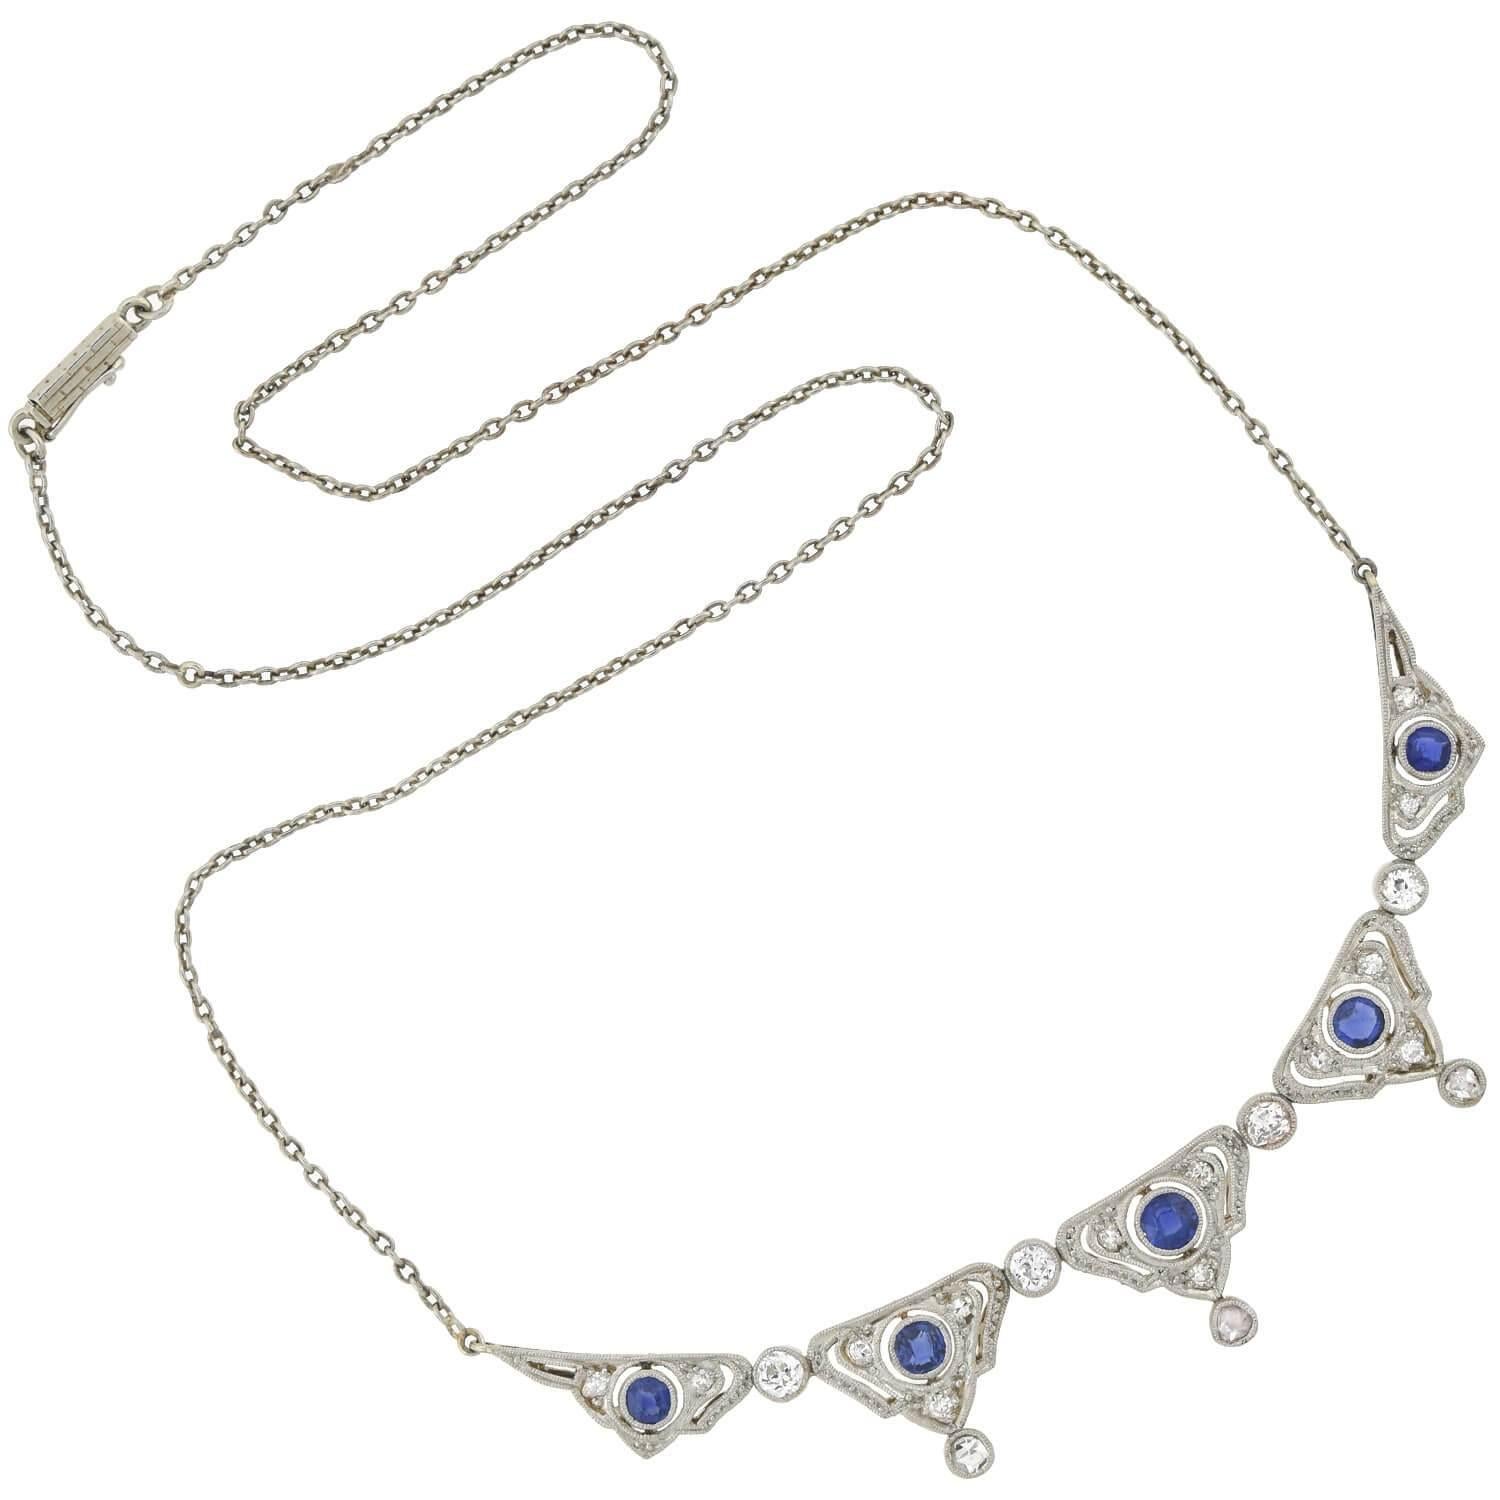 A stunning diamond and sapphire necklace from the Edwardian (ca1910s) era! Crafted in platinum topped 14kt yellow gold, this beautiful piece features five triangular links which alternate with four glittering Full Cut diamonds. Each triangular link